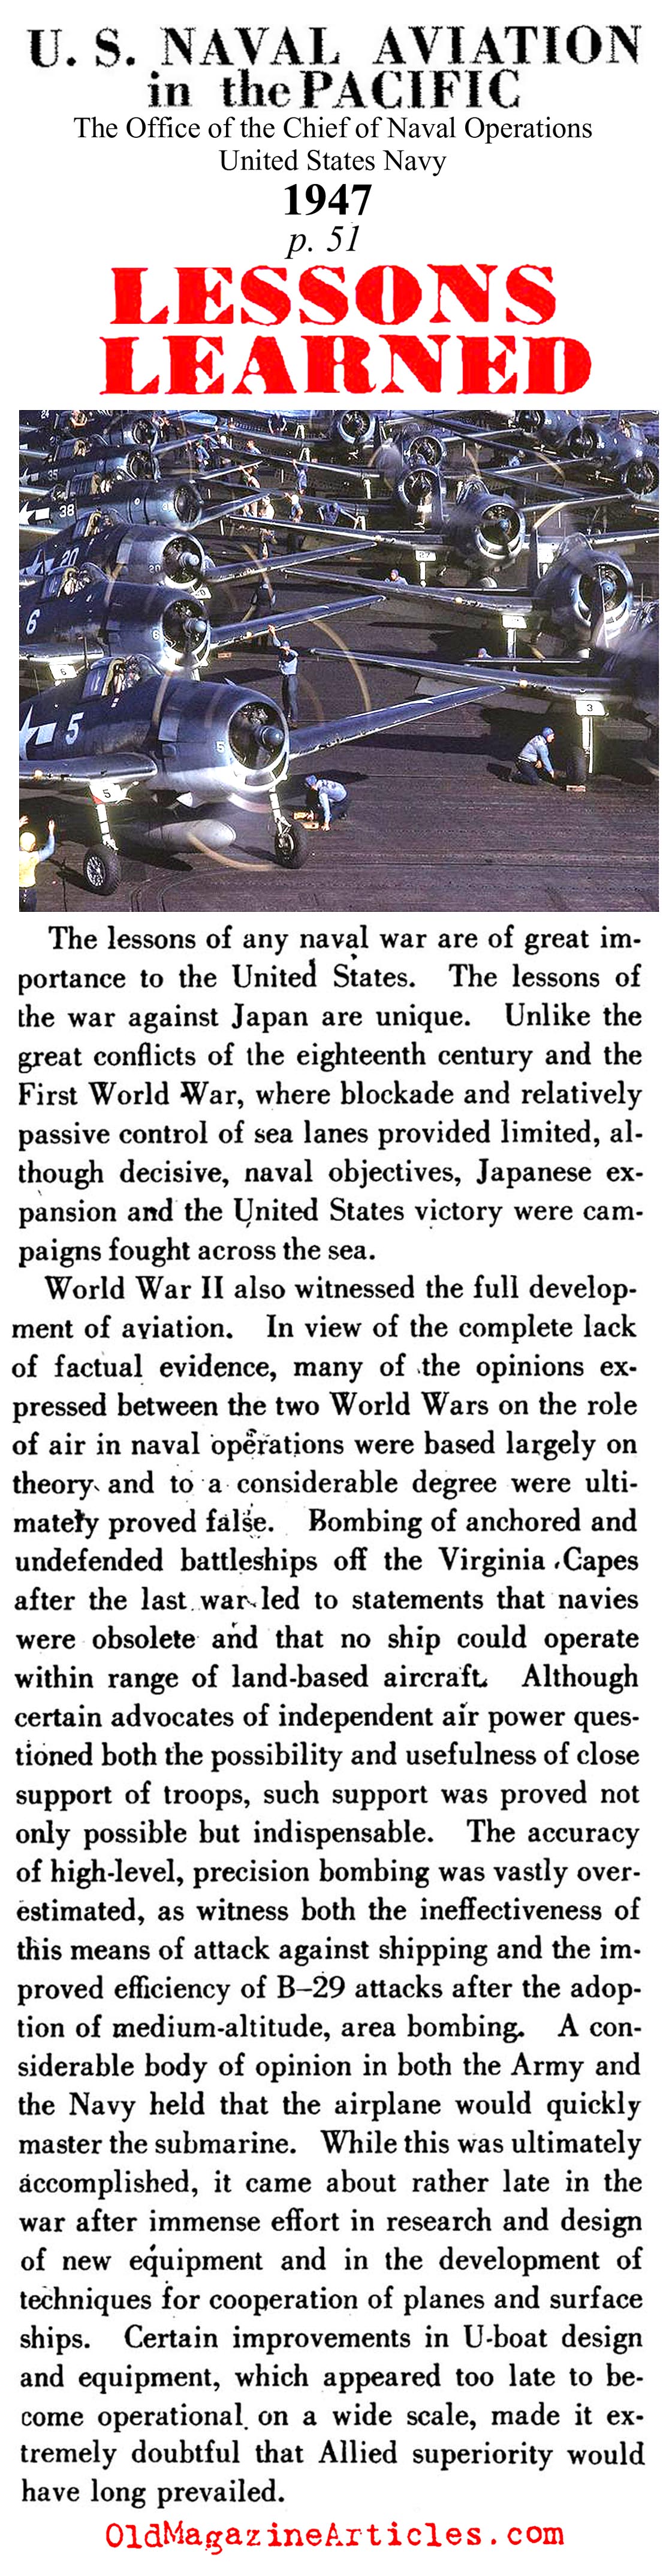 What the Navy Learned During the Pacific War (Dept. of the Navy, 1947)